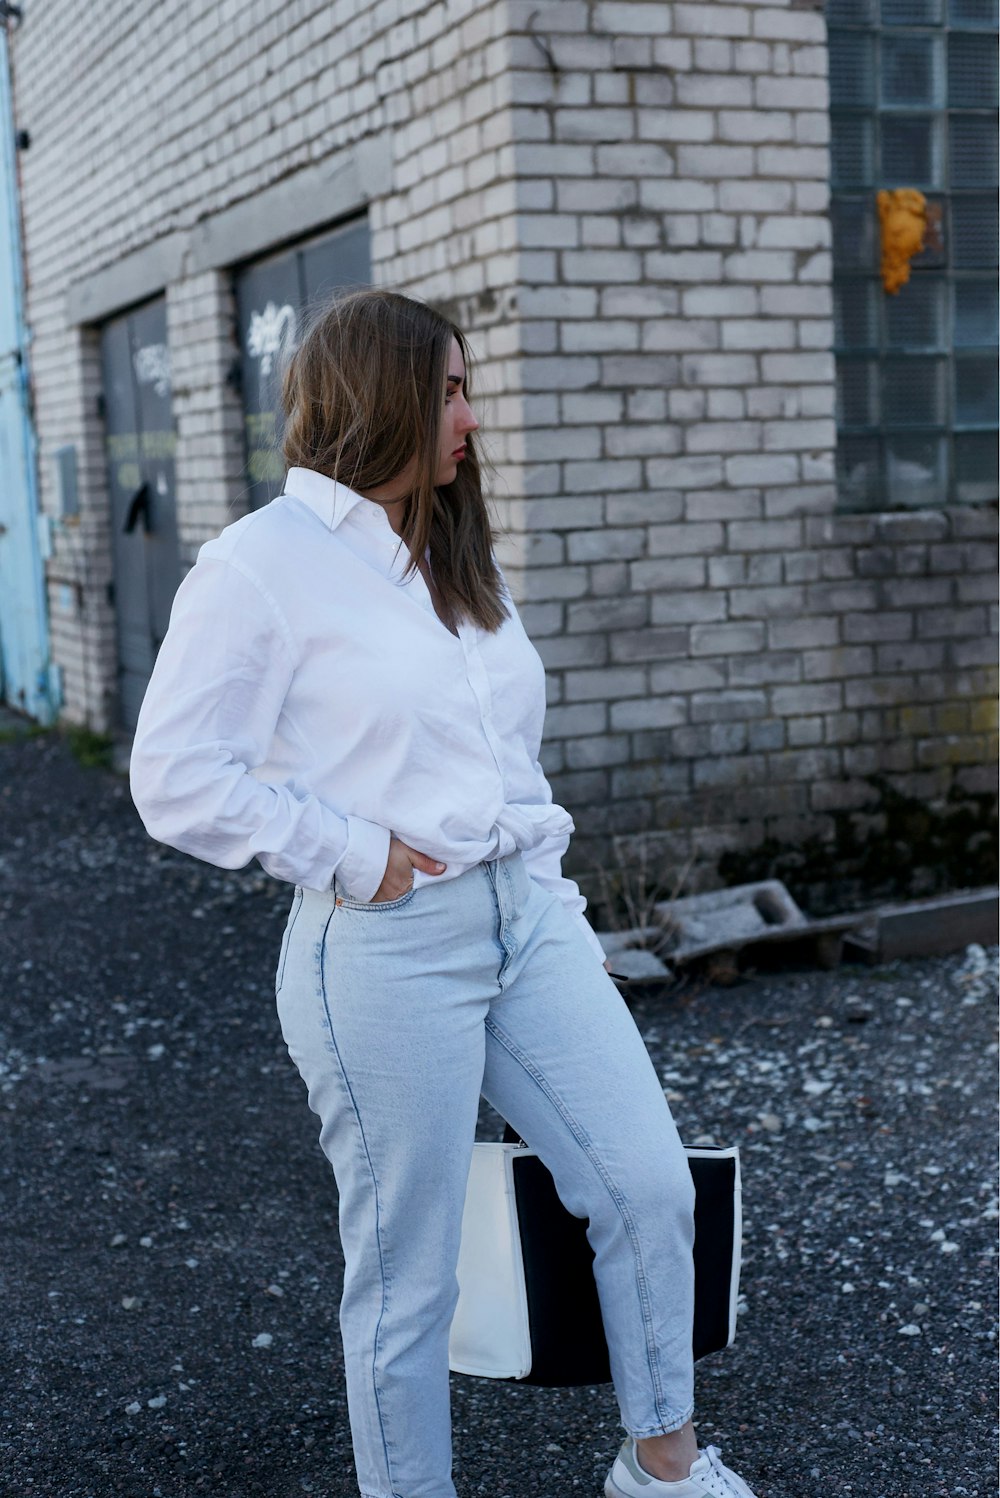 Woman in white long sleeve shirt and blue denim jeans standing near brick  wall during daytime photo – Free Woman Image on Unsplash